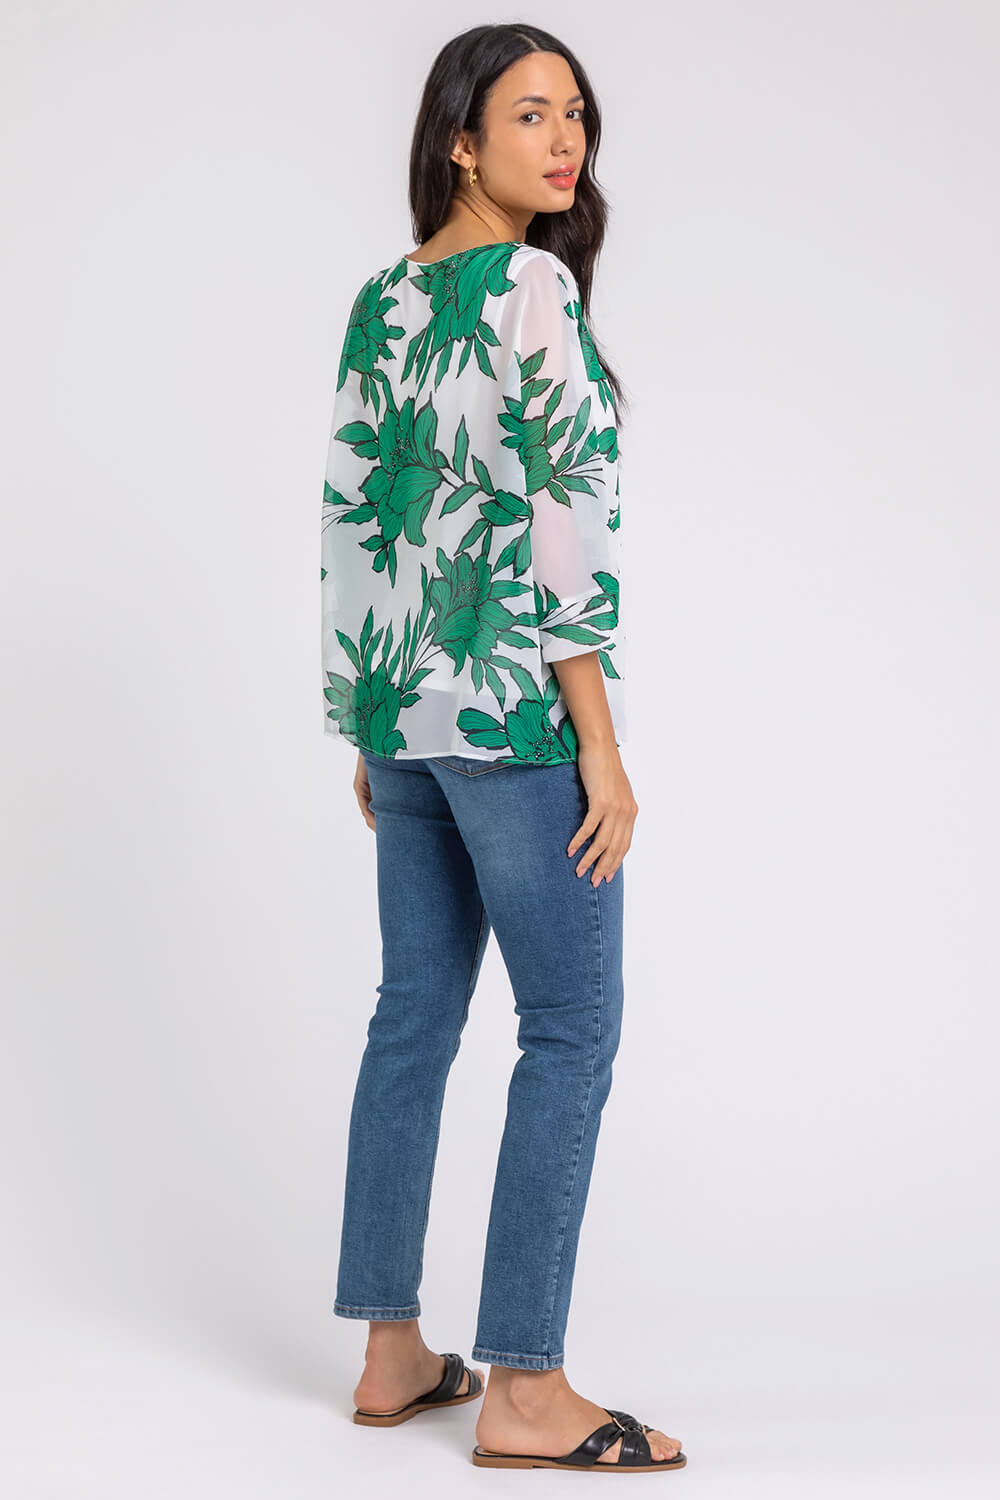 Green Floral Print Chiffon Overlay Top, Image 2 of 5